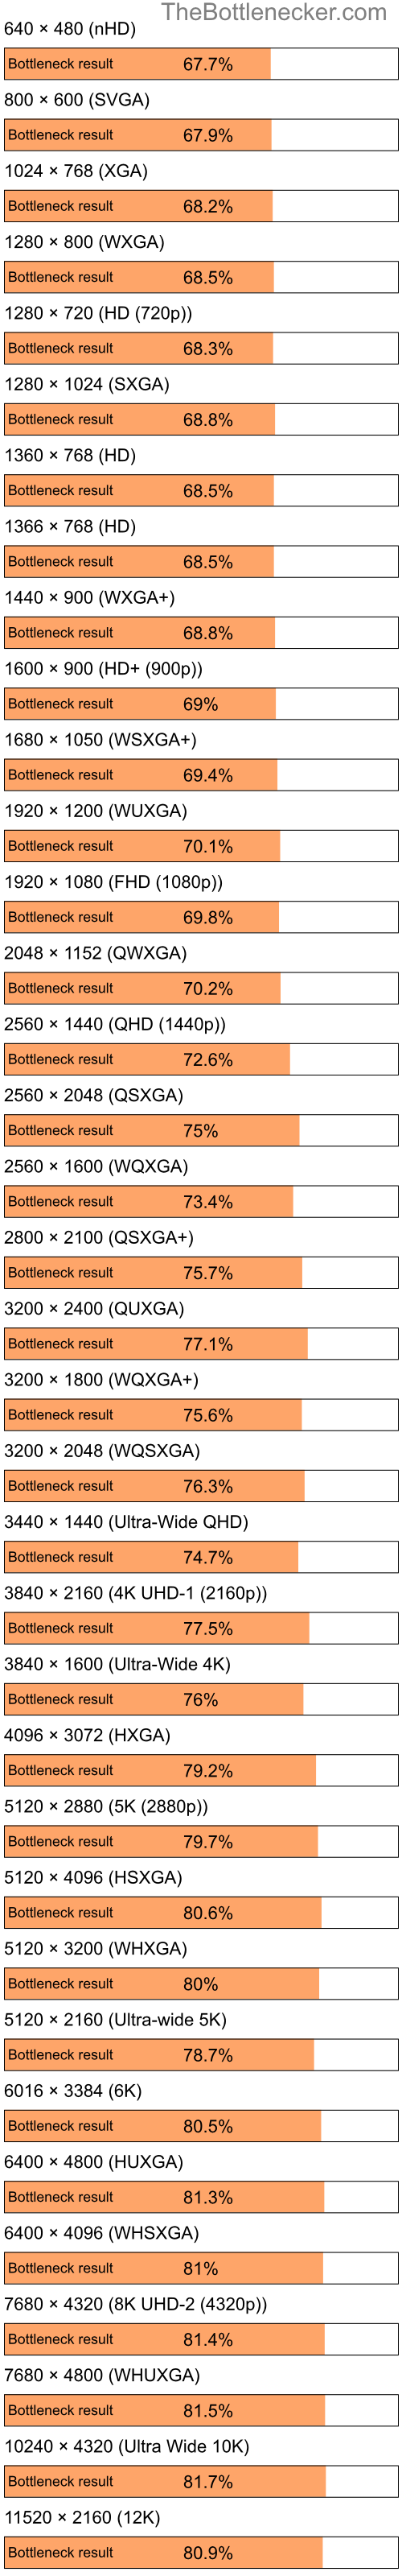 Bottleneck results by resolution for Intel Celeron and NVIDIA GeForce 9400 in Graphic Card Intense Tasks